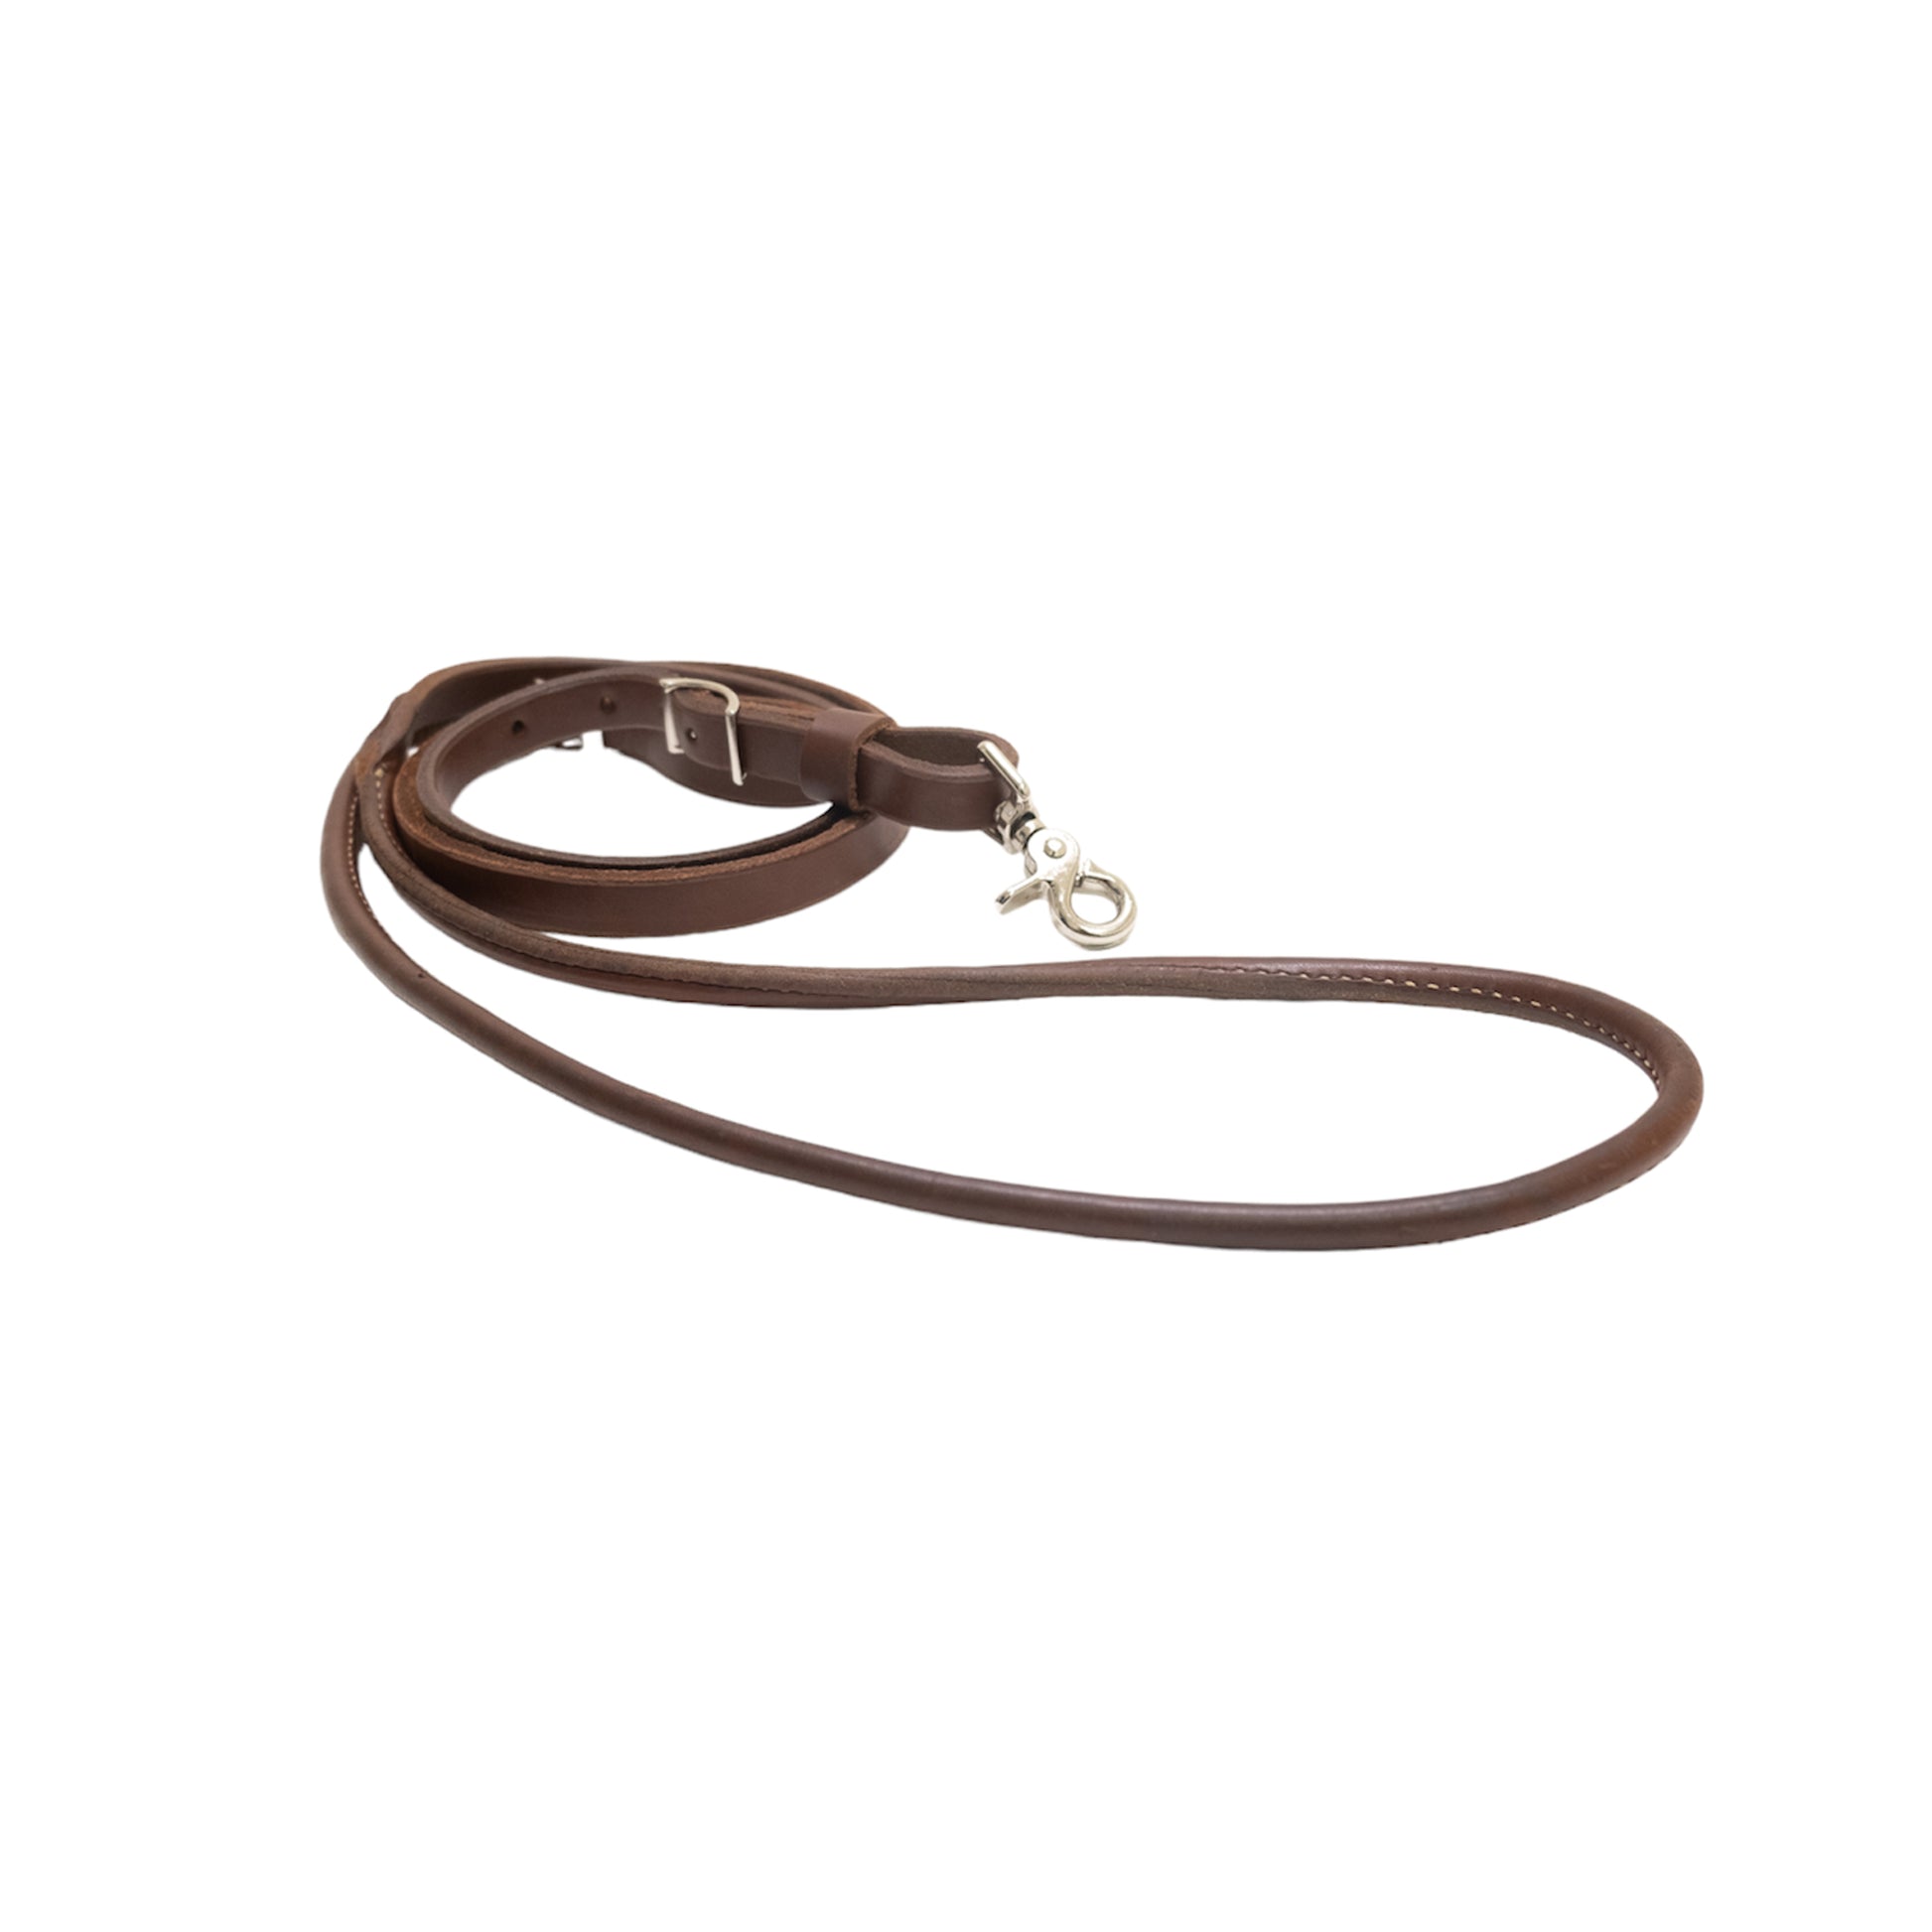 5/8" Rolled roping rein heavy oiled harness leather with snap.